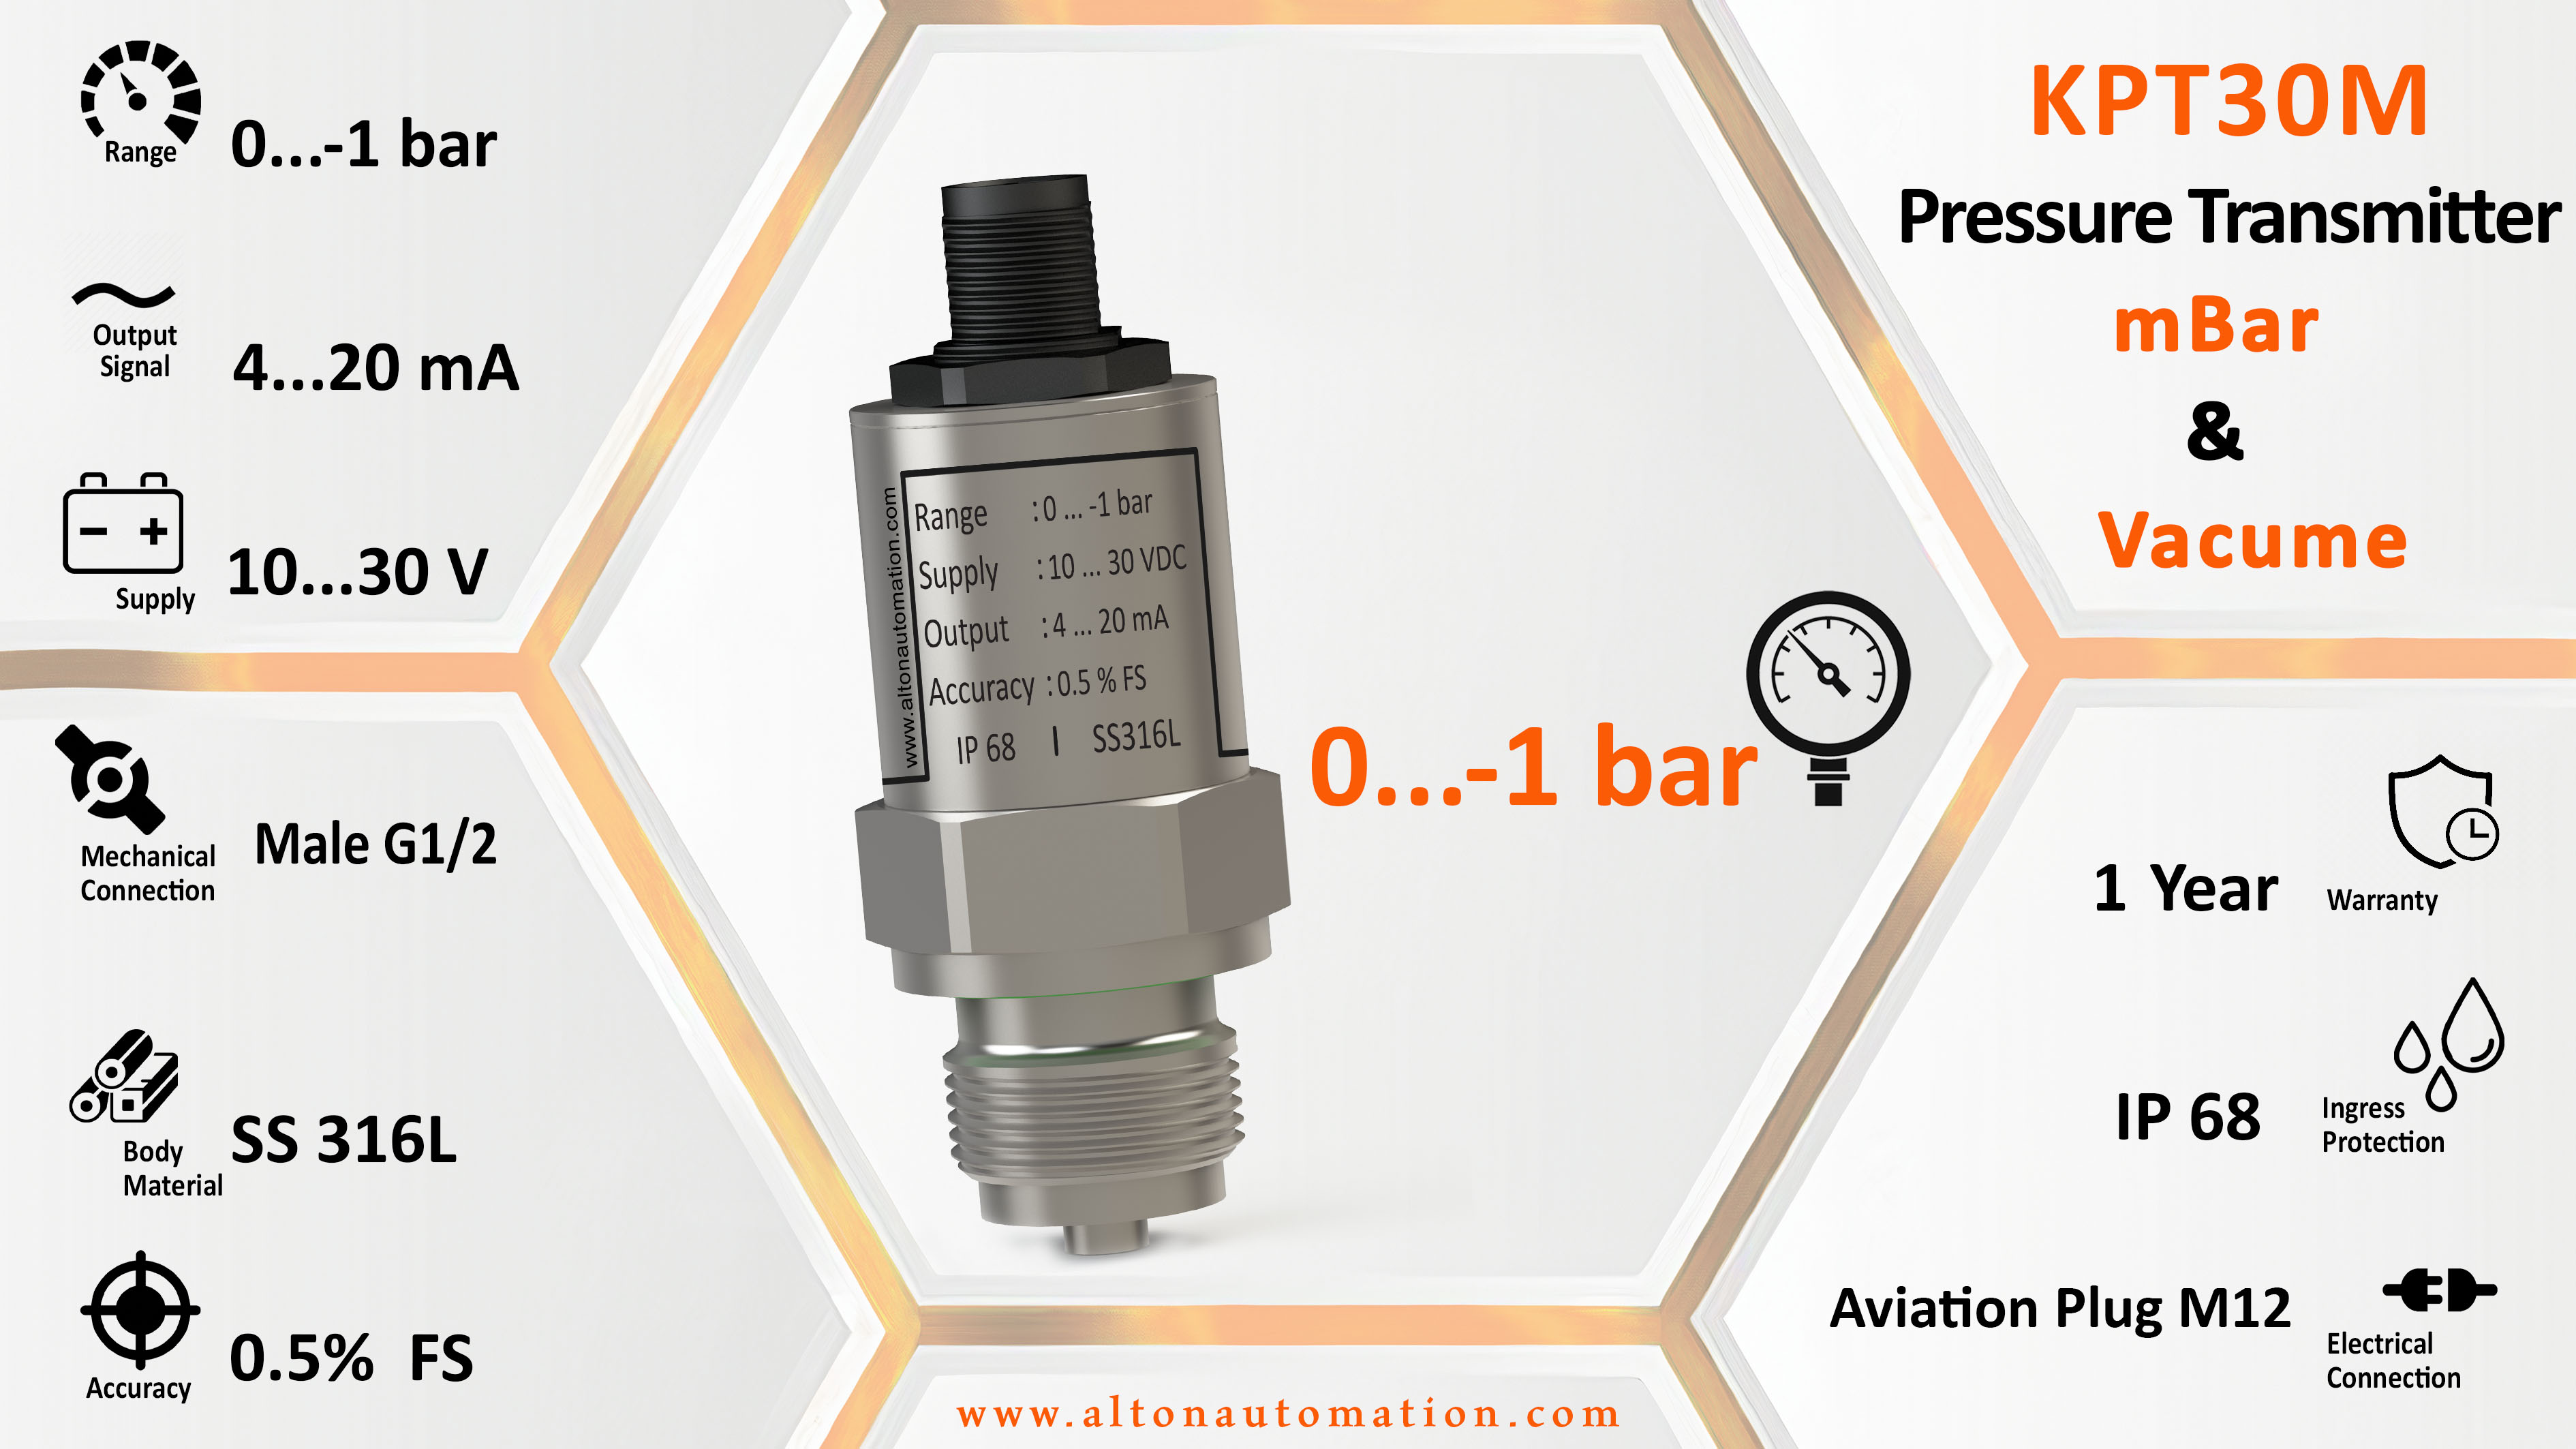 Pressure Transmitter for mbar and vacume_KPT30M-0V1-C1-MG2_image_2